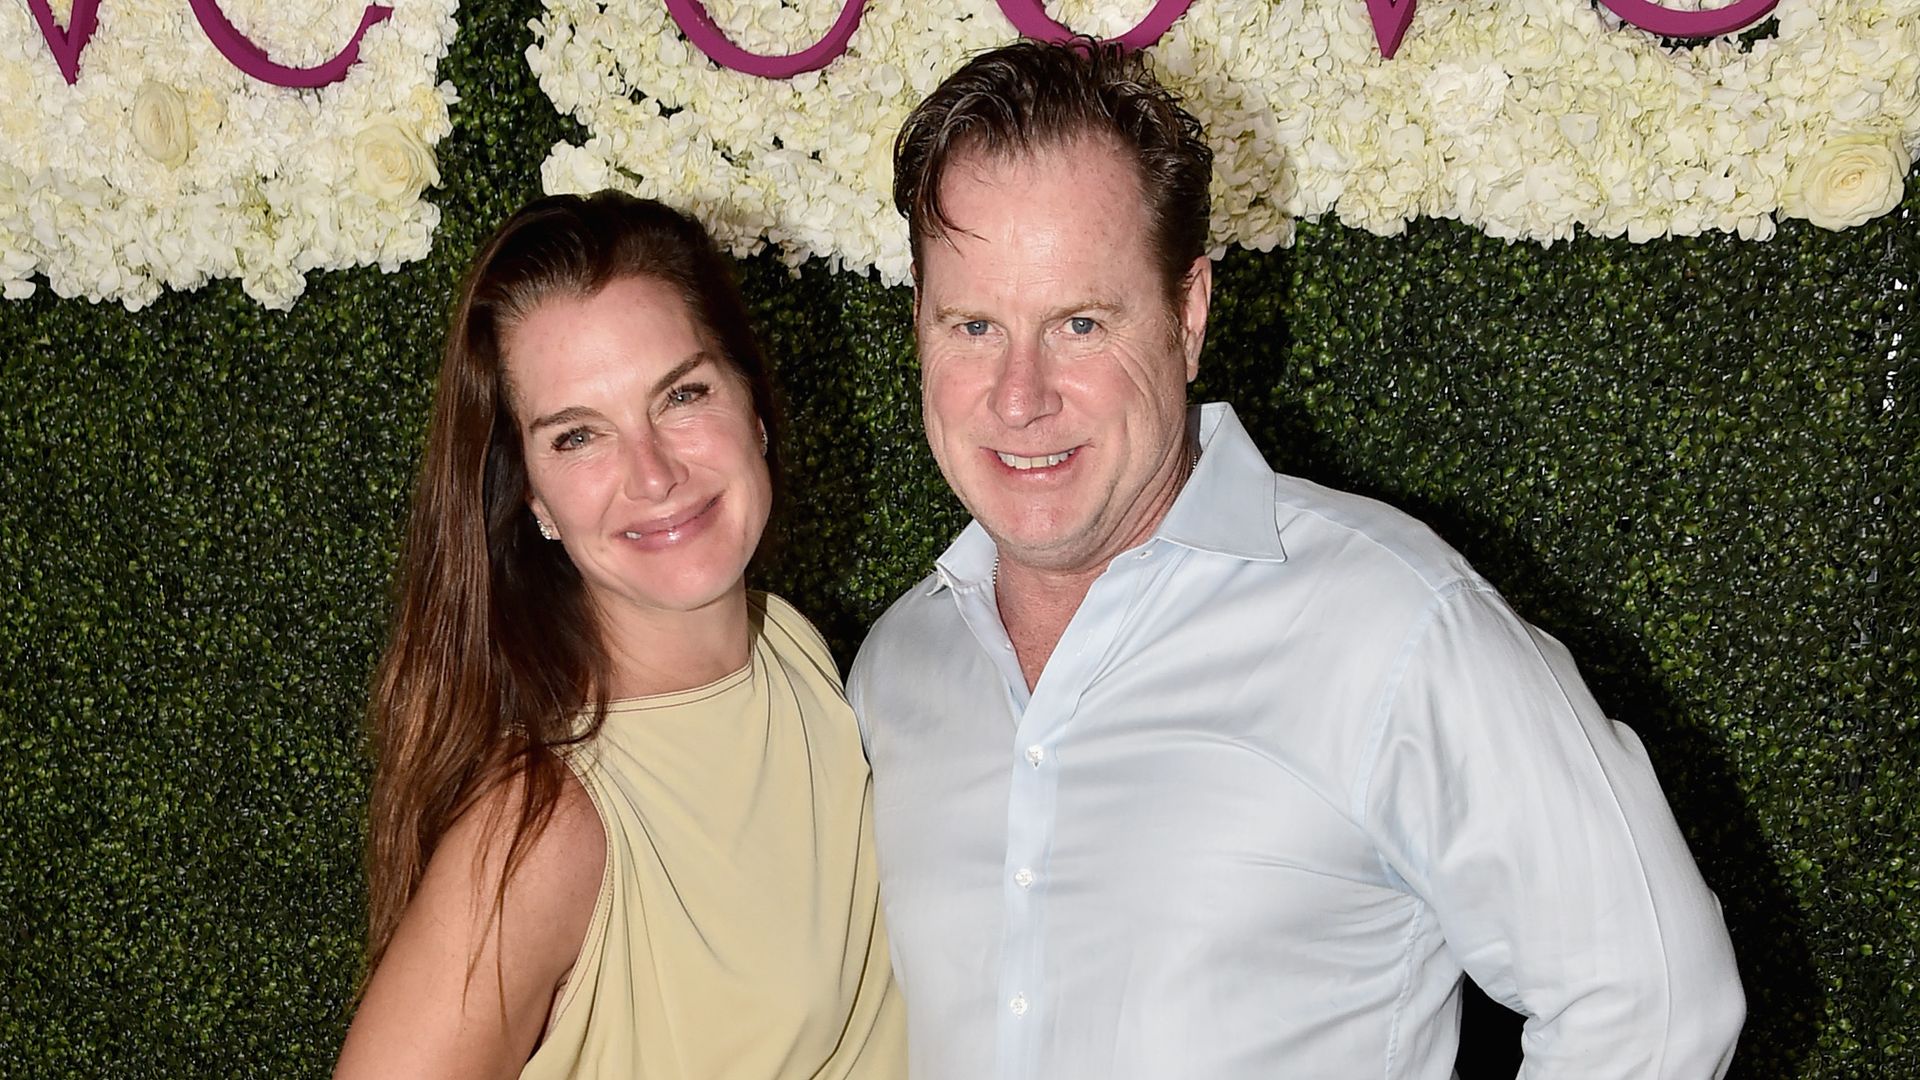 Brooke Shields and Chris Henchy in the Bahamas